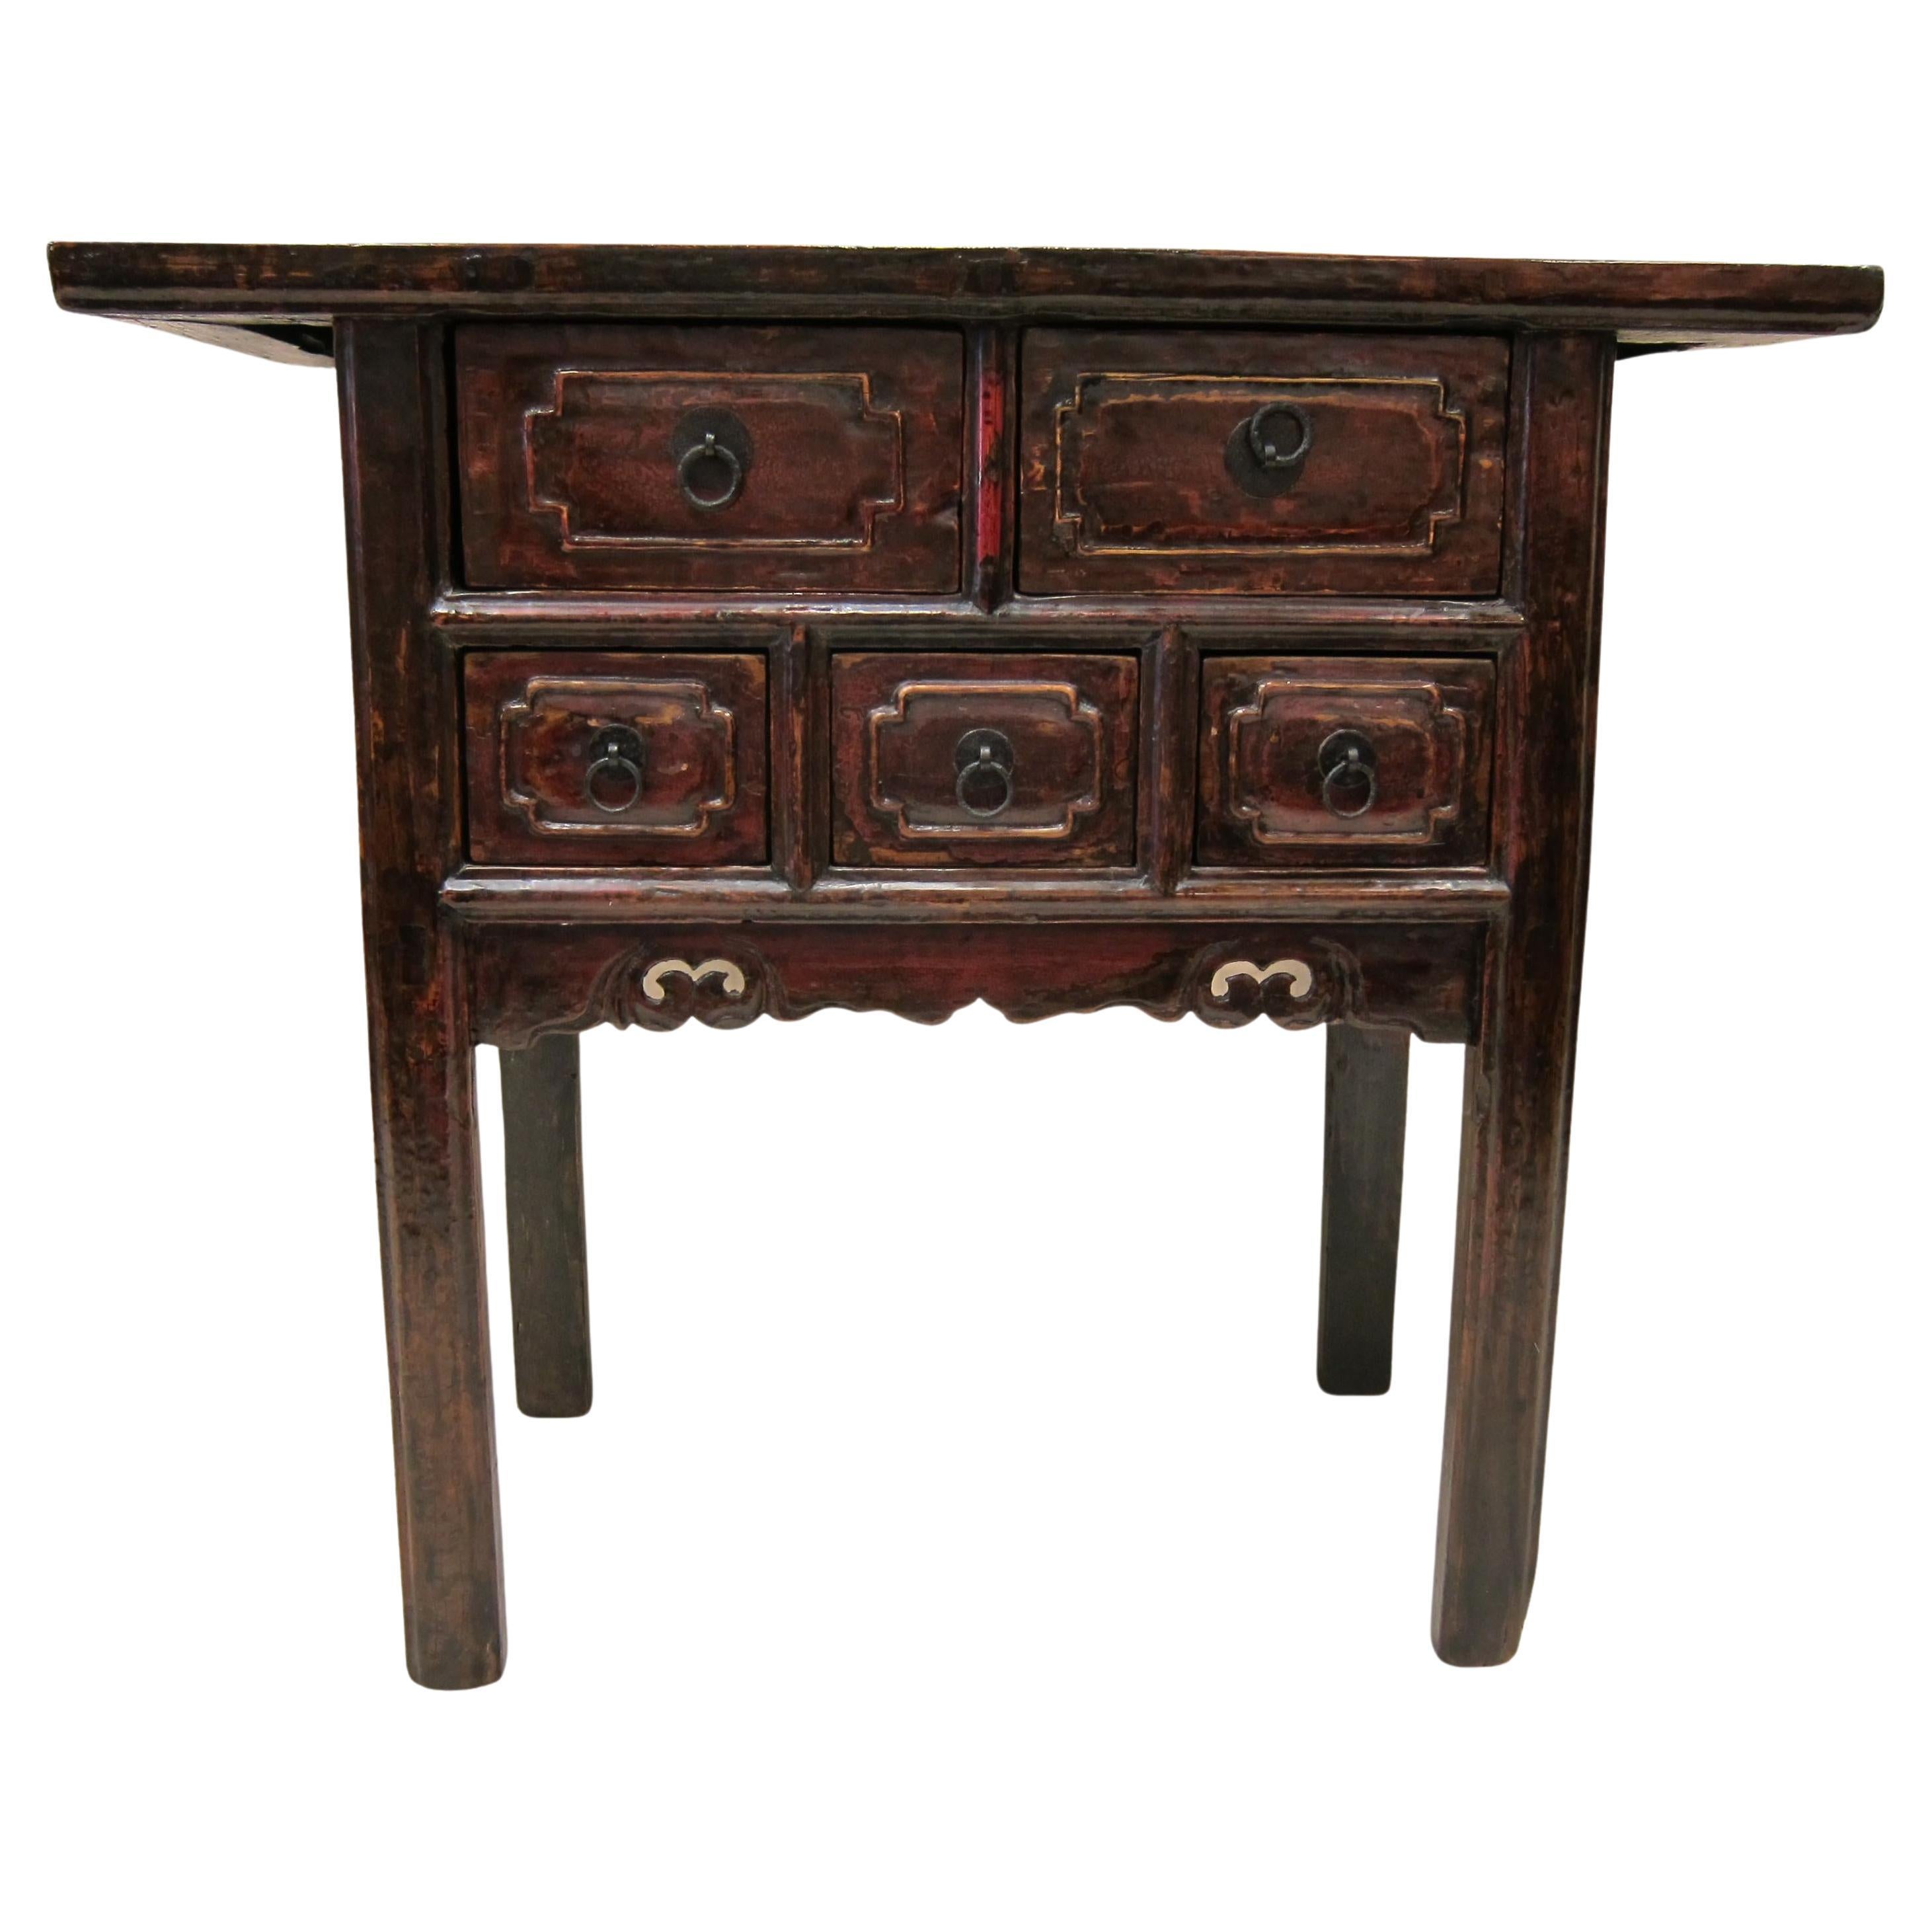 19th Century Rustic Console Table